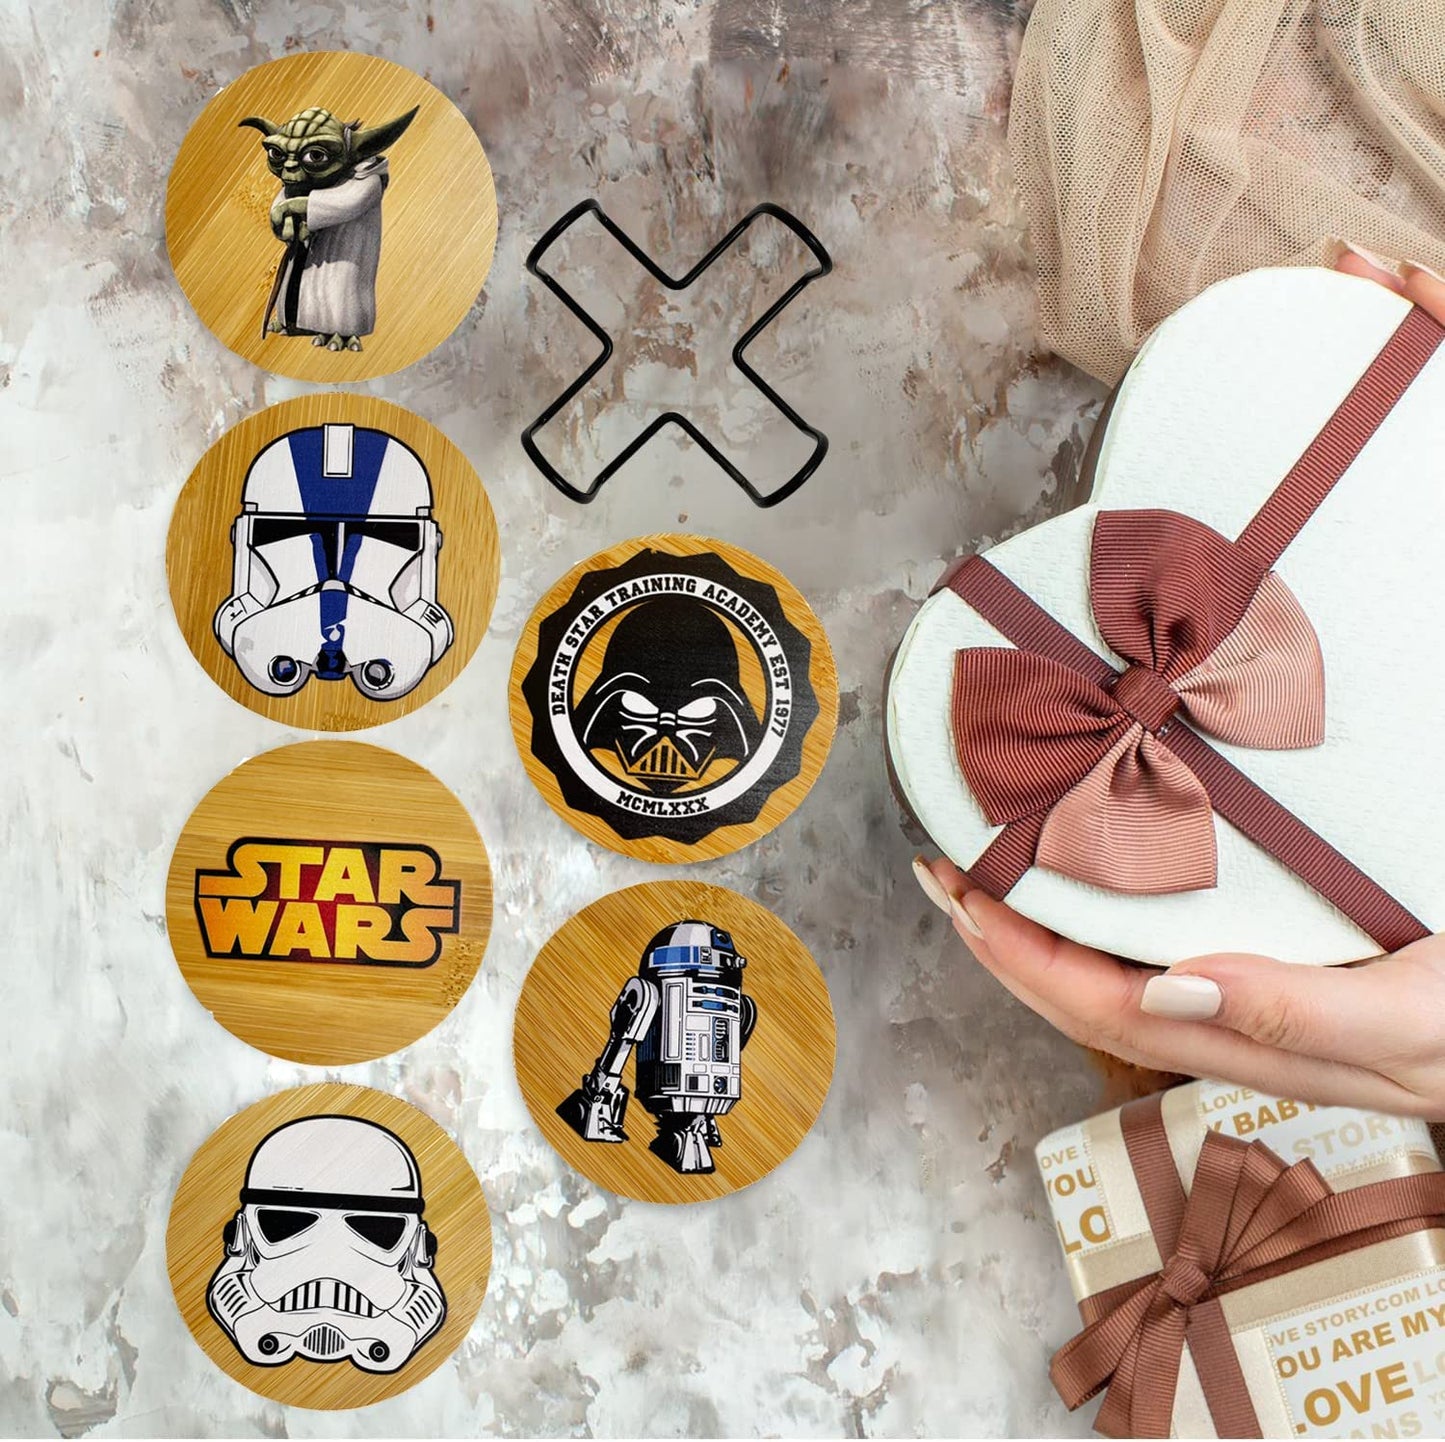 Star War Coasters for Drinks,6 PCS Funny Coasters Set with Coaster Holder,Wood Coasters for Coffee Table,Cute Coasters for Home Decor,Star War Merchandise, Star War Gifts